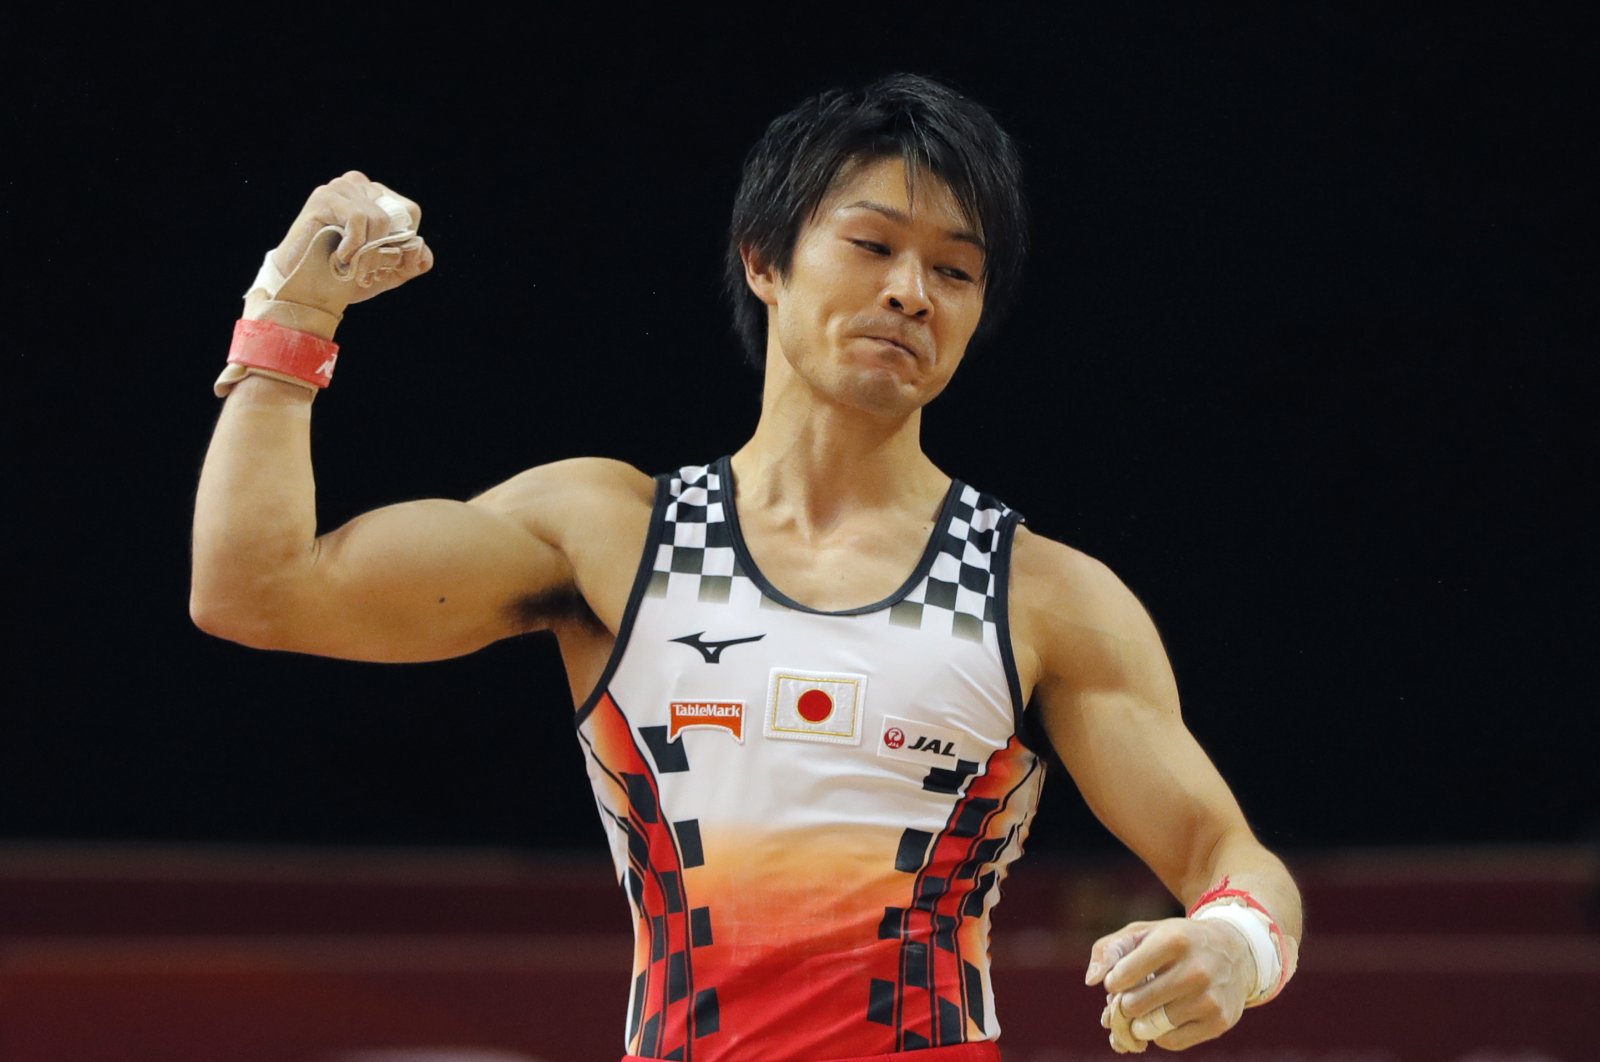 In this Oct. 29, 2018, file photo, Japan's Kohei Uchimura celebrates his performance on the rings during the men's team final of the Gymnastics World Championships at the Aspire Dome in Doha, Qatar. (AP Photo)